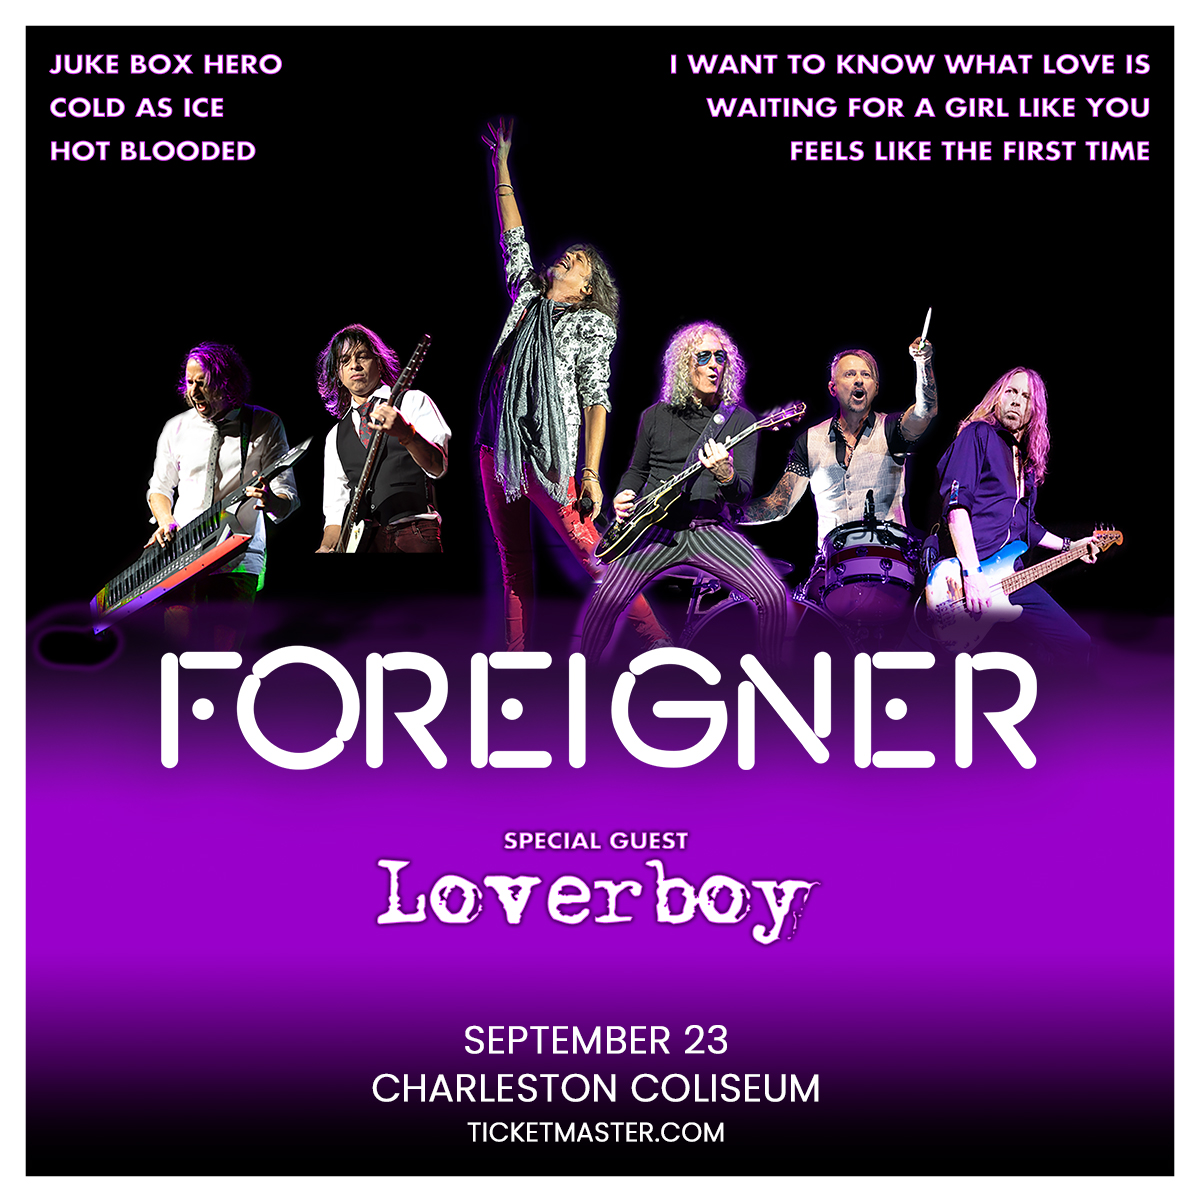 Just Announced ⚡️Foreigner is coming to the Coliseum with Loverboy on September 23. Tickets on sale Friday bit.ly/3vsNOki #Centerofitall #foreigner #CWV